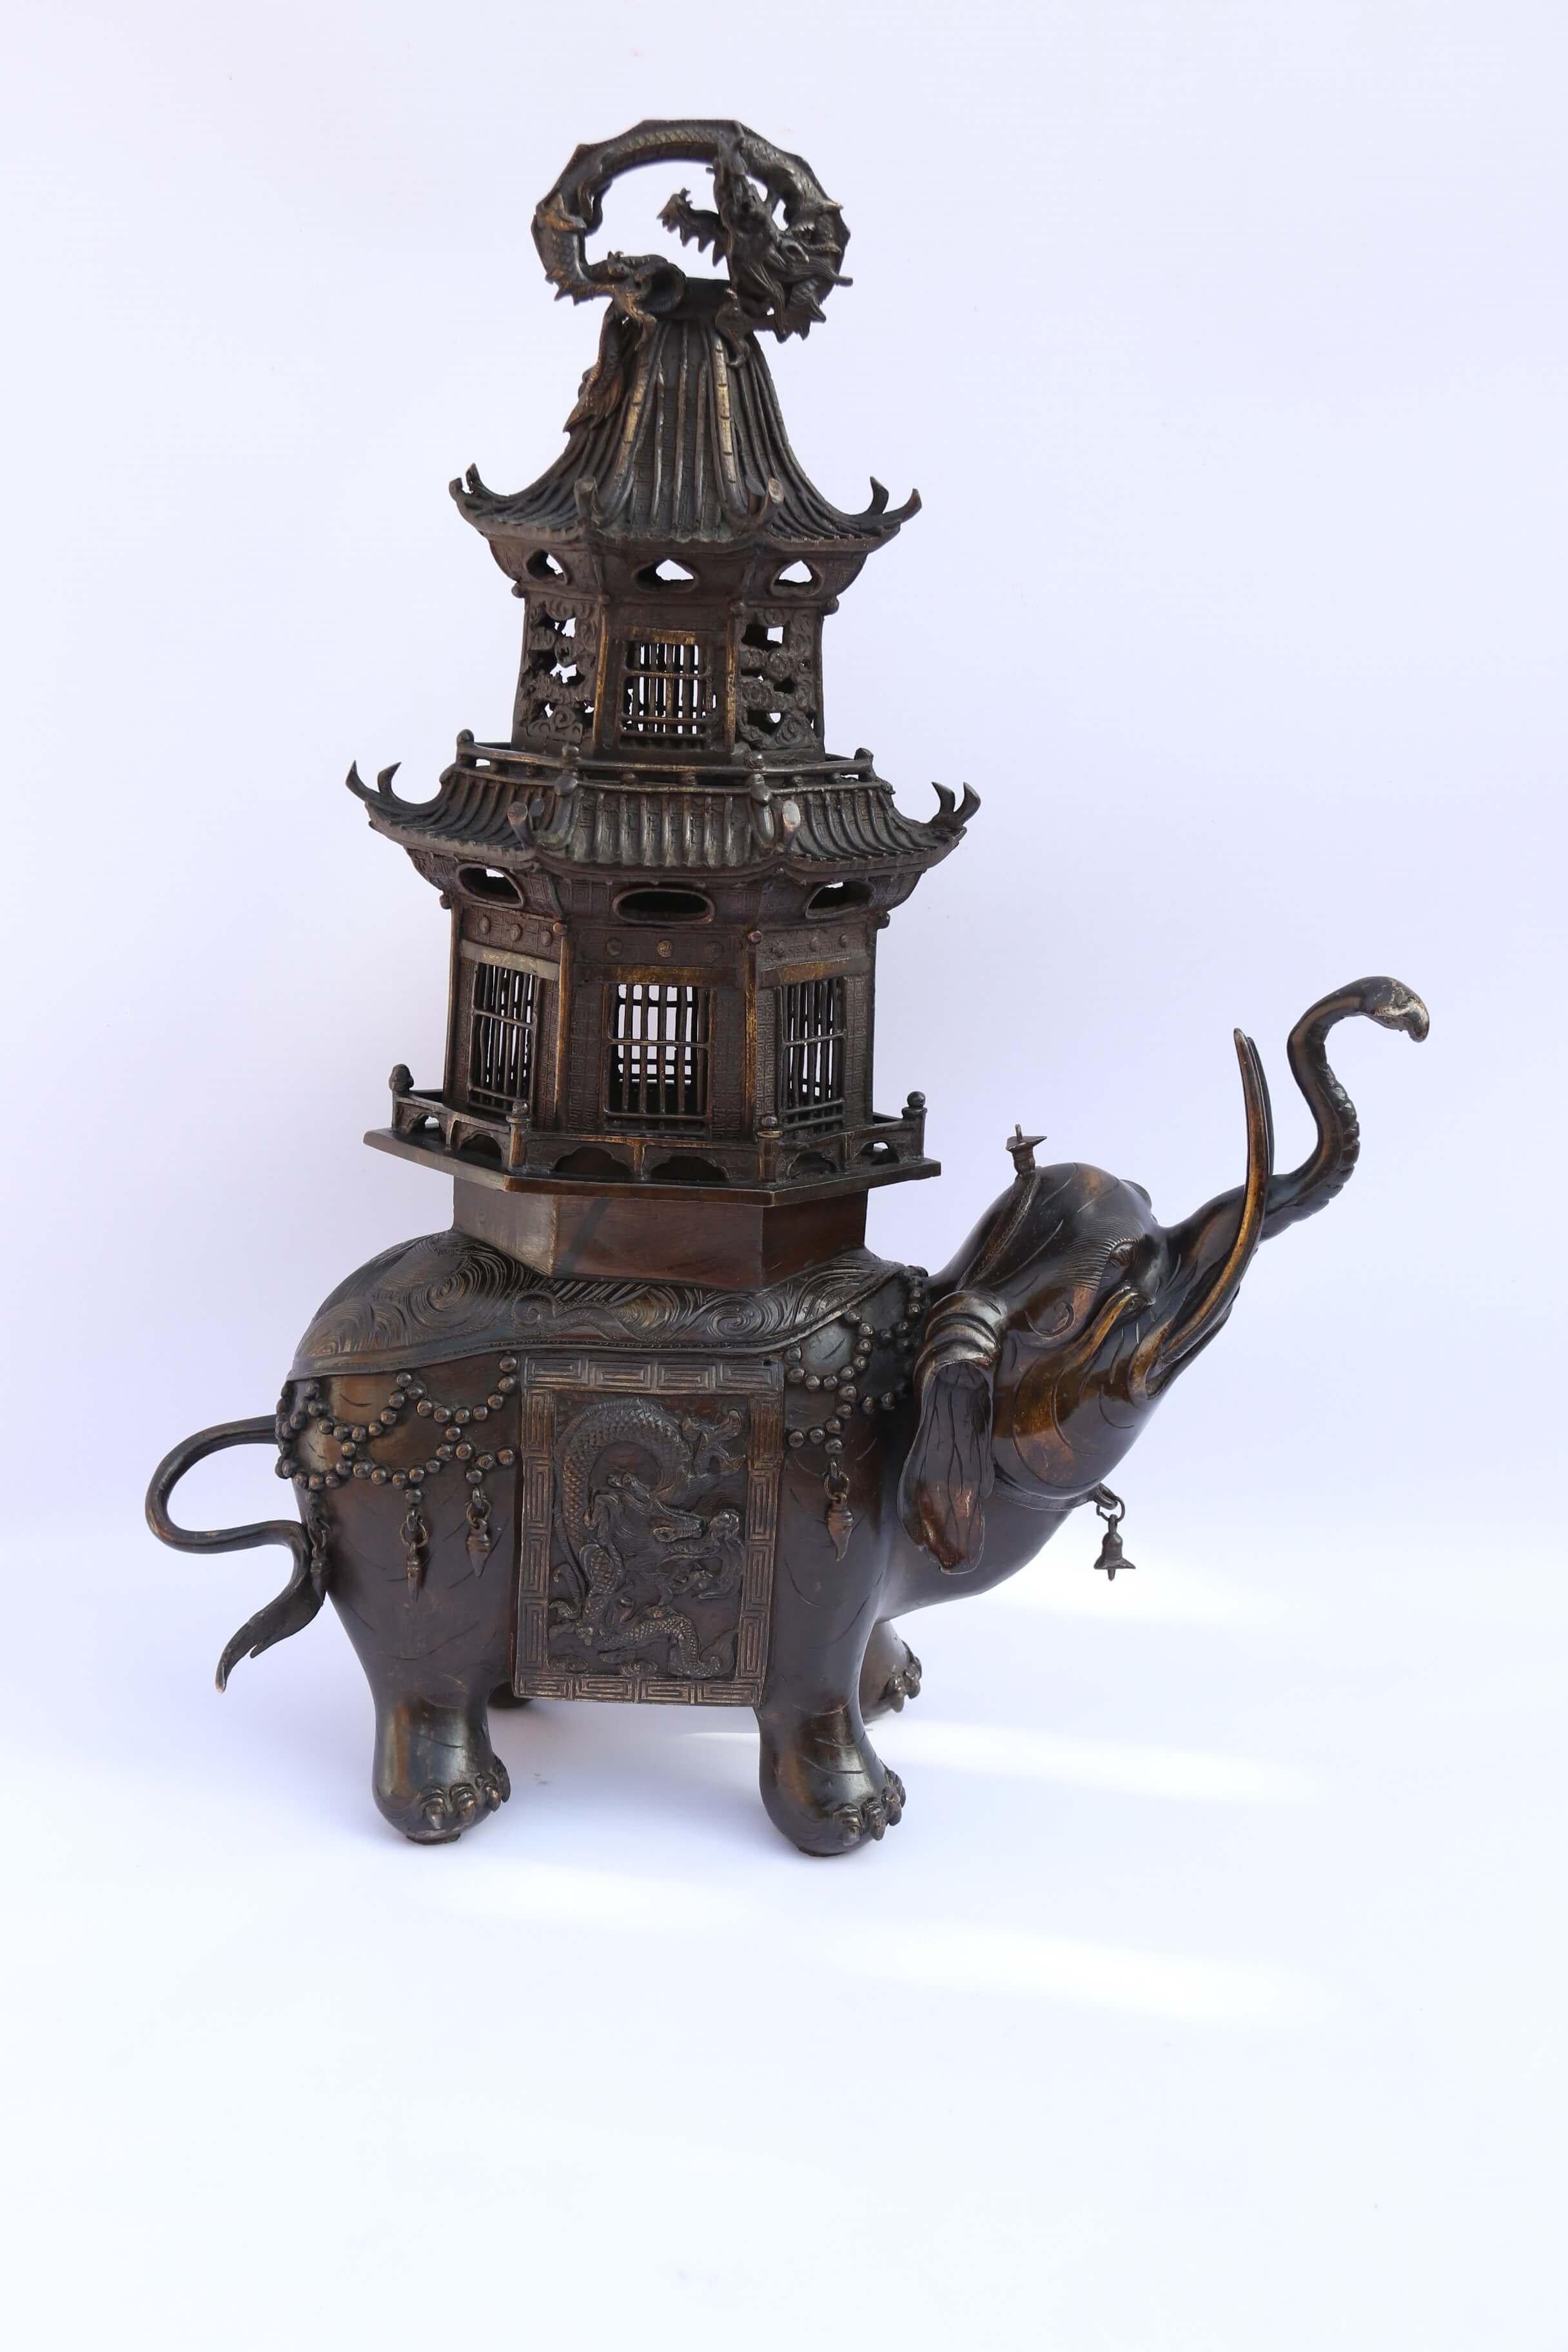 A highly decorative Japanese bronze study of ceremonial elephant wearing a elaborate saddlecloth adorned with jewels and a superbly detailed relief dragon decoration with a Greek key pattern surrounding it. The elephant is carrying a two storey